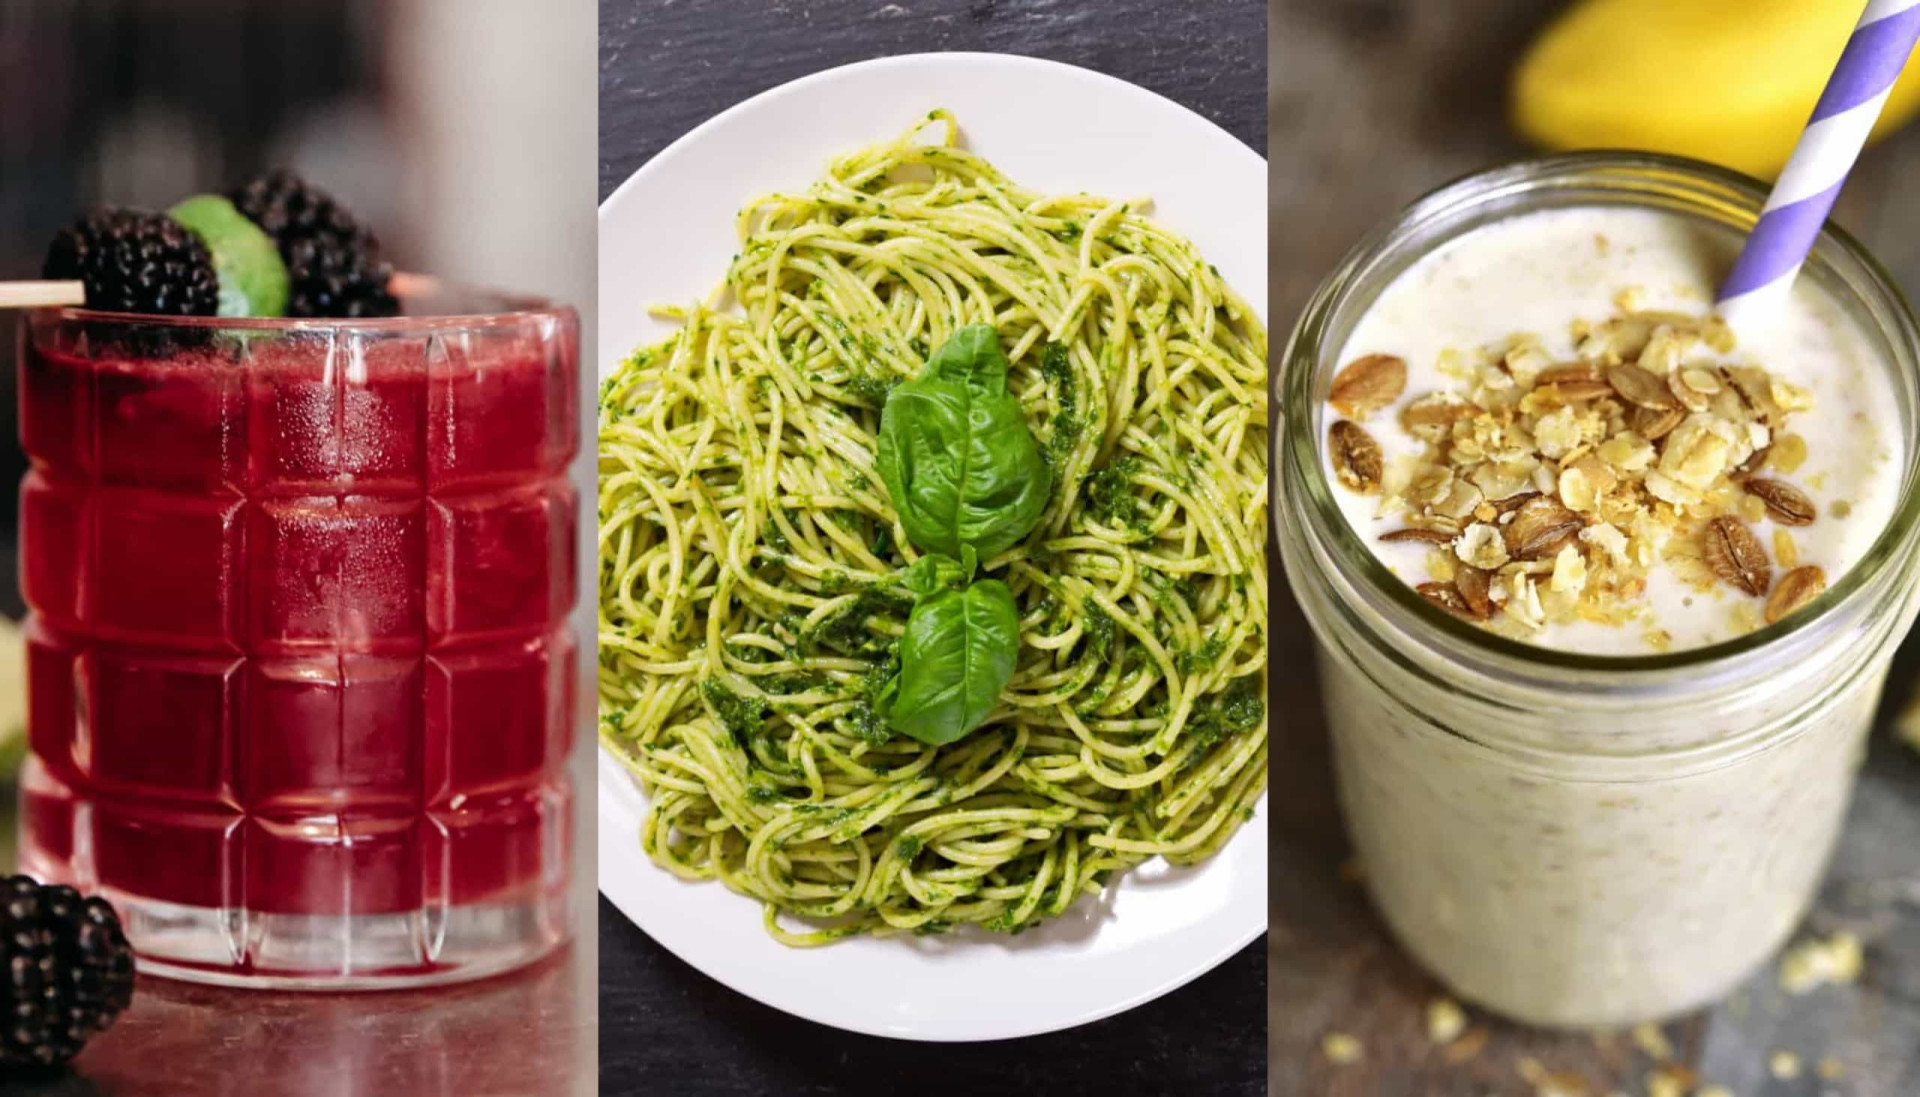 Effortless eats: simple and delicious 3-ingredient recipes